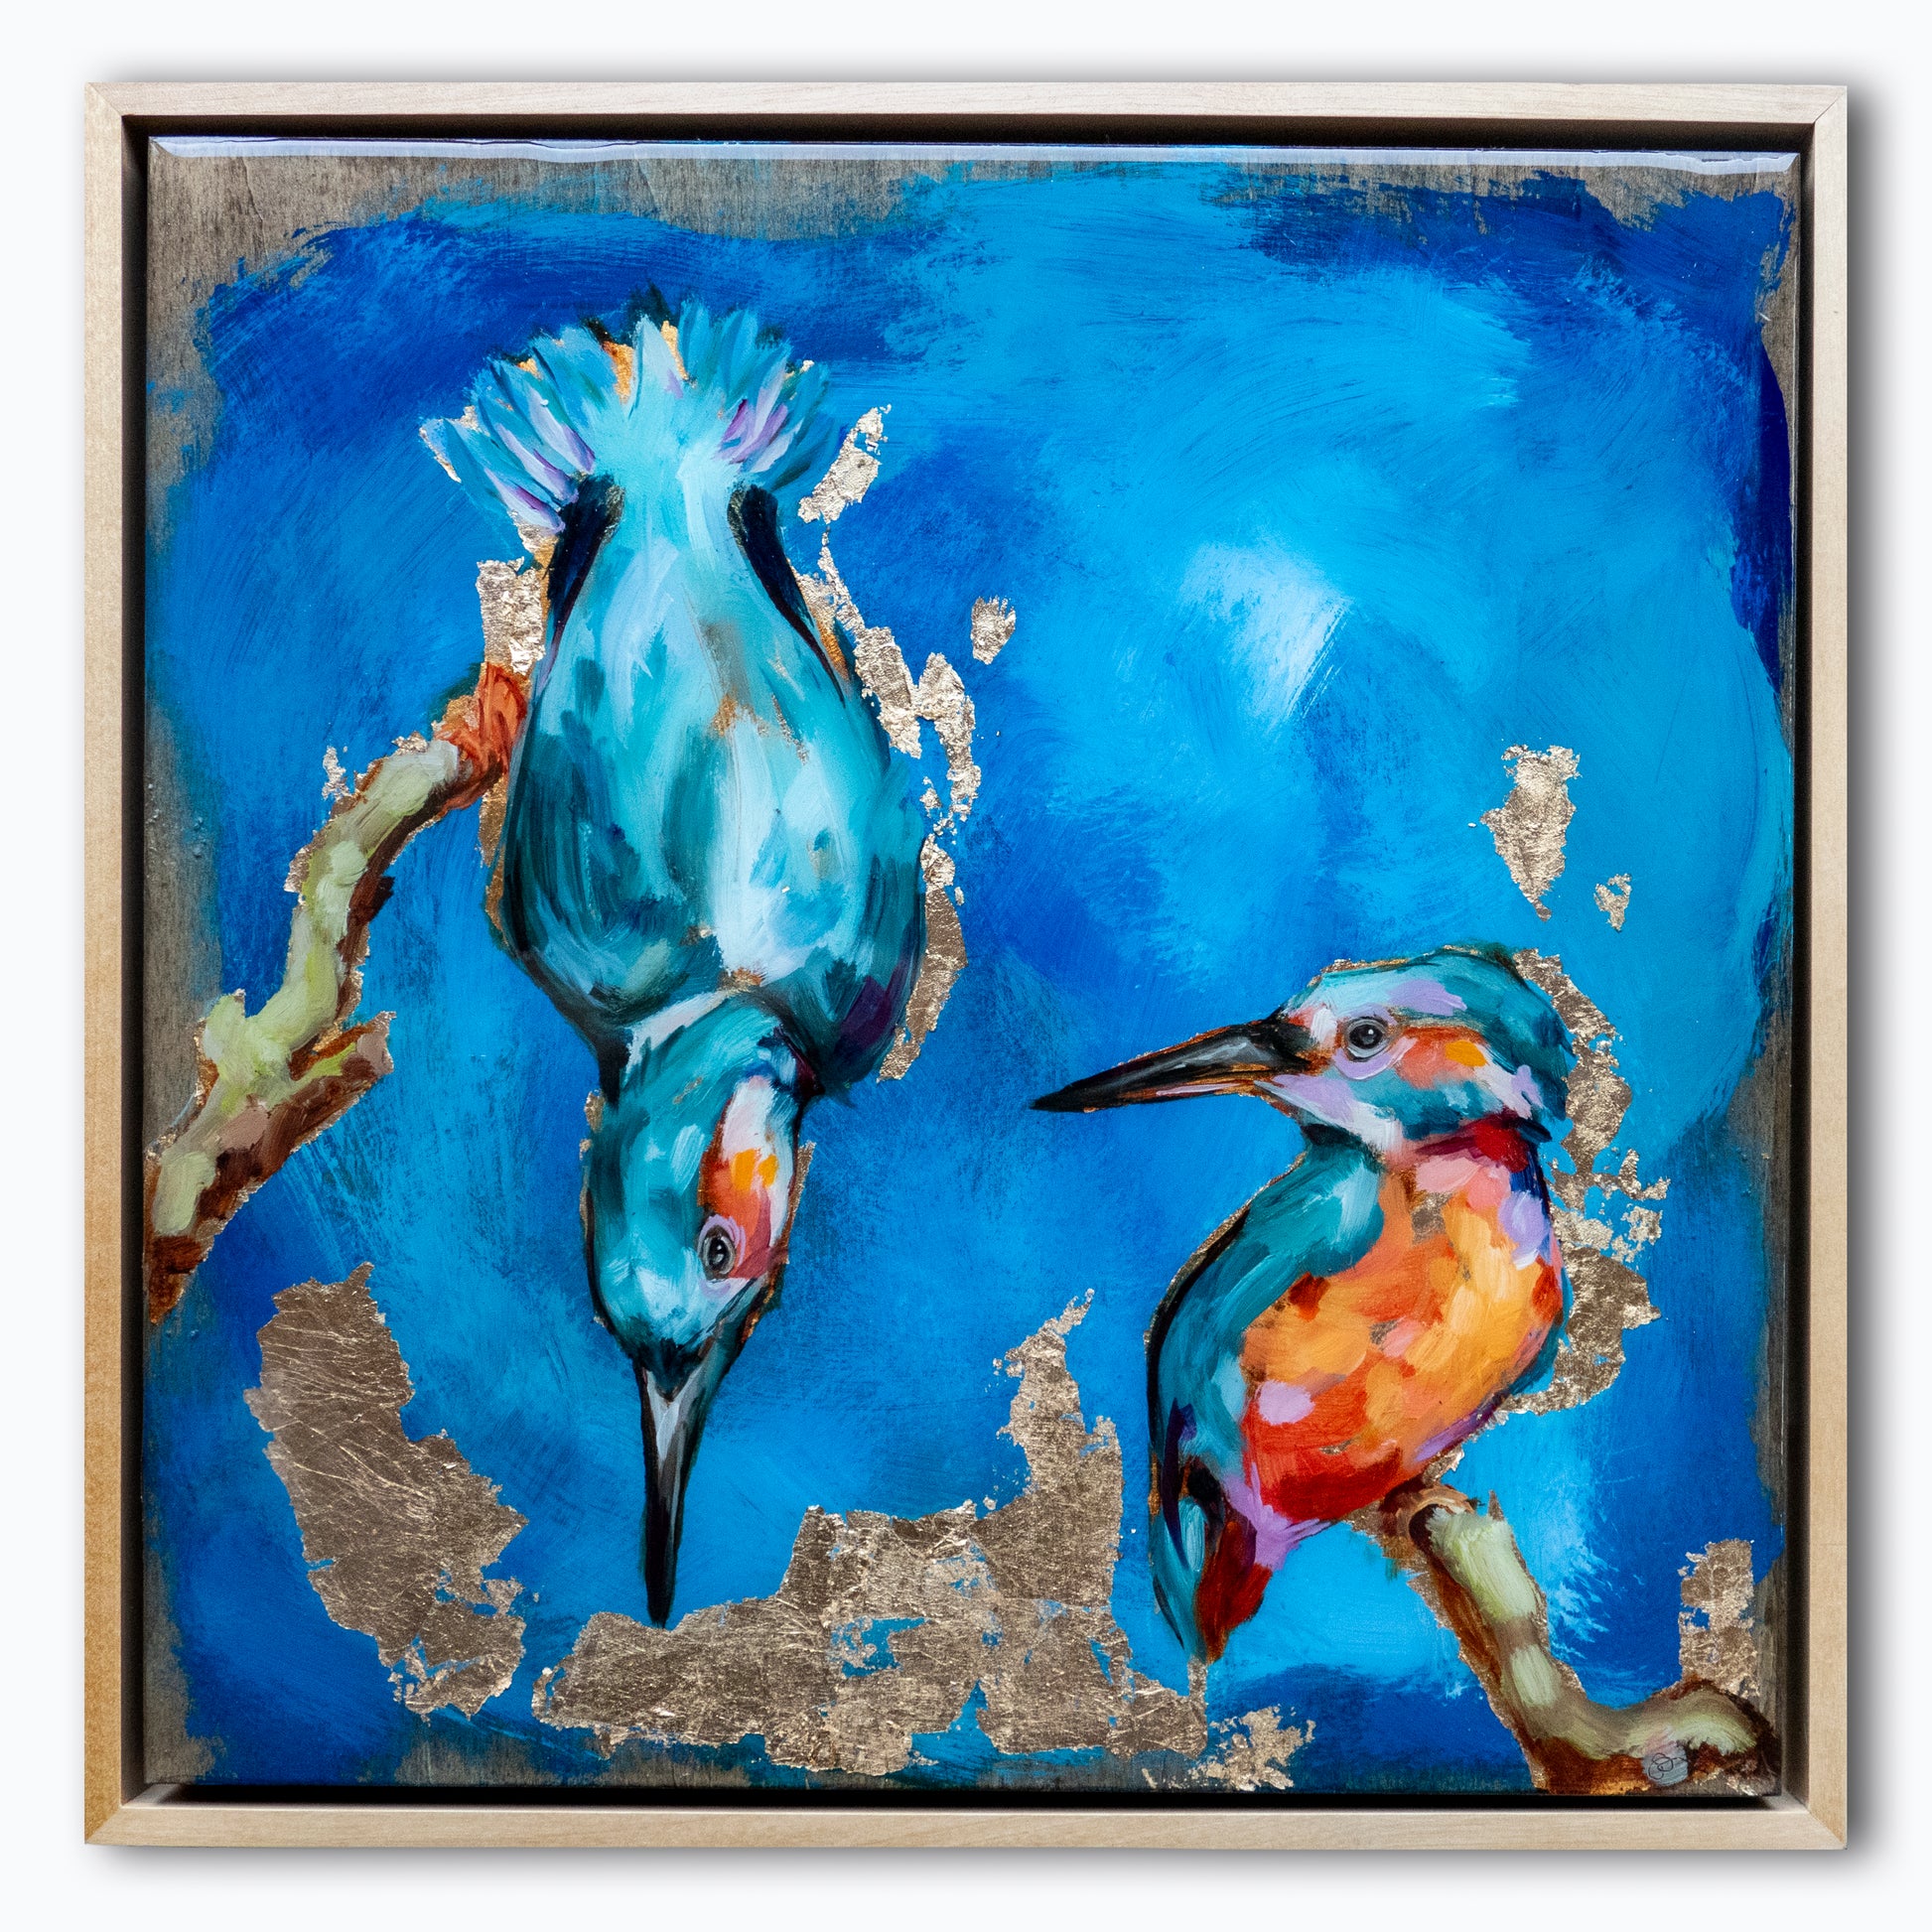 12.5"x12.5" painting of two Kingfishers is mixed media; using acrylic and oil, pencil, and gold leaf with glossy resin finish on surface; colorful with mostly blues and golds; artist Shaney Watters; incl raw maple float frame